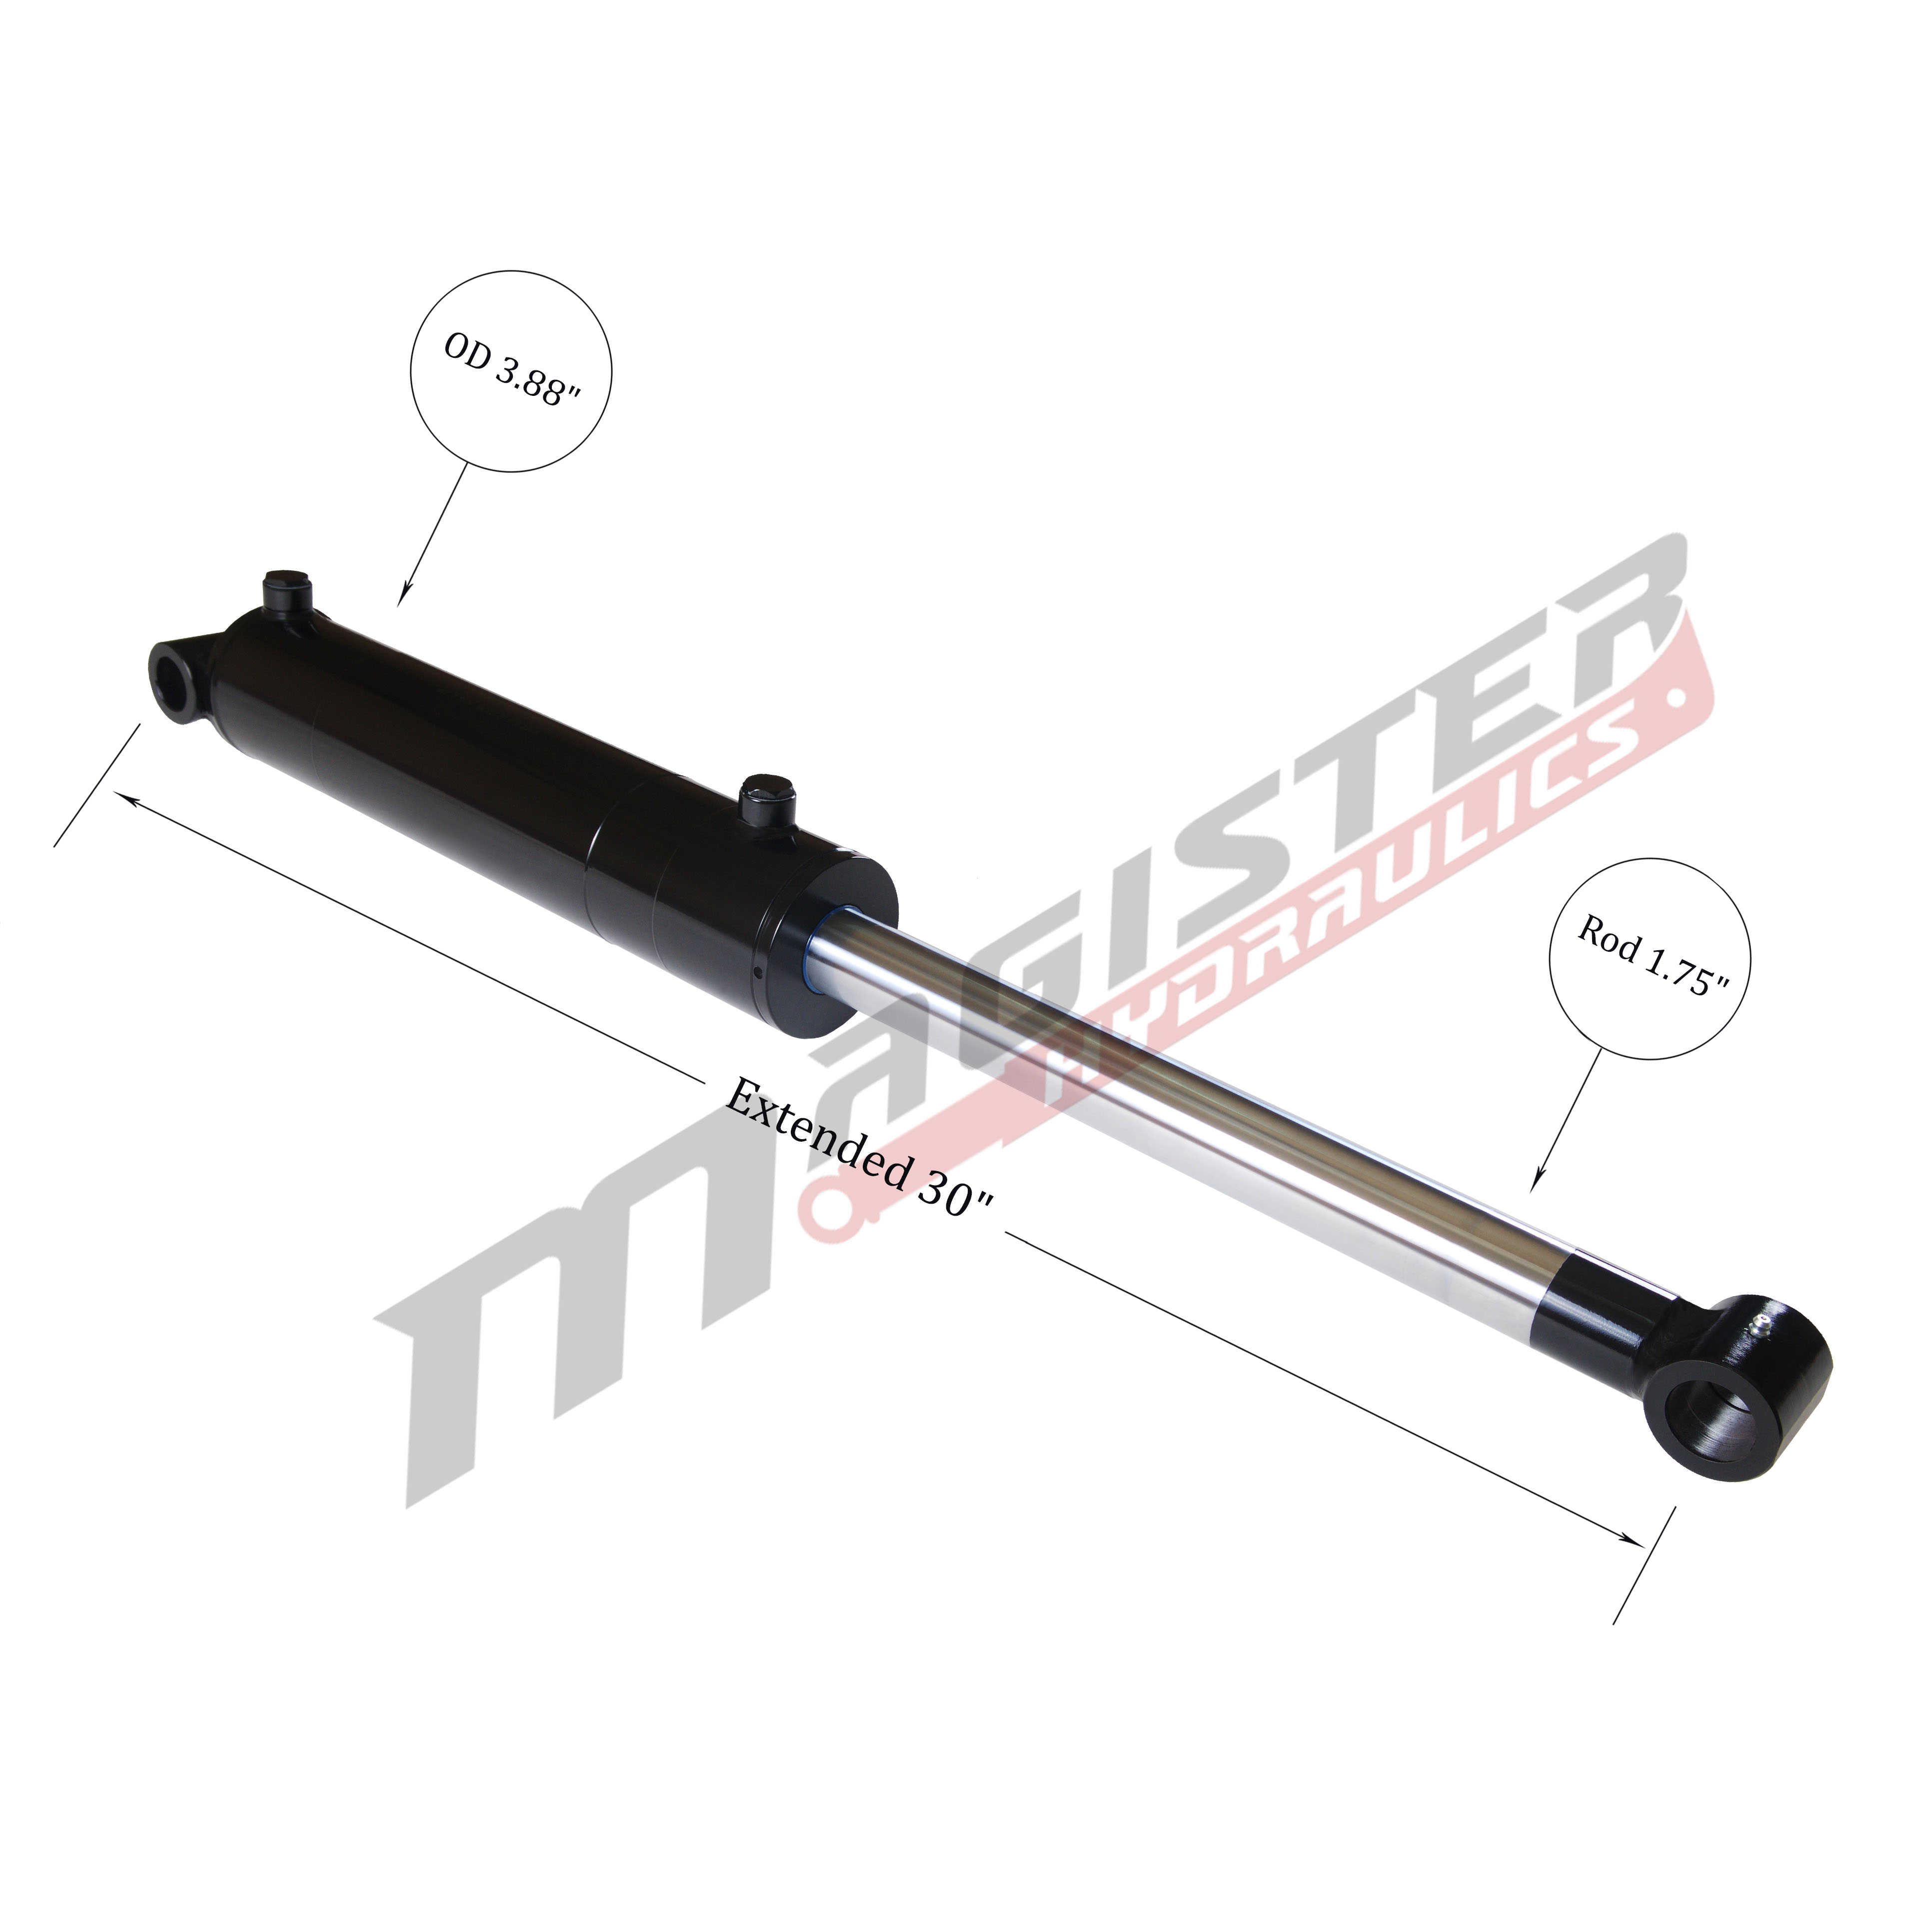 3.5 bore x 8 stroke hydraulic cylinder, welded cross tube double acting cylinder | Magister Hydraulics